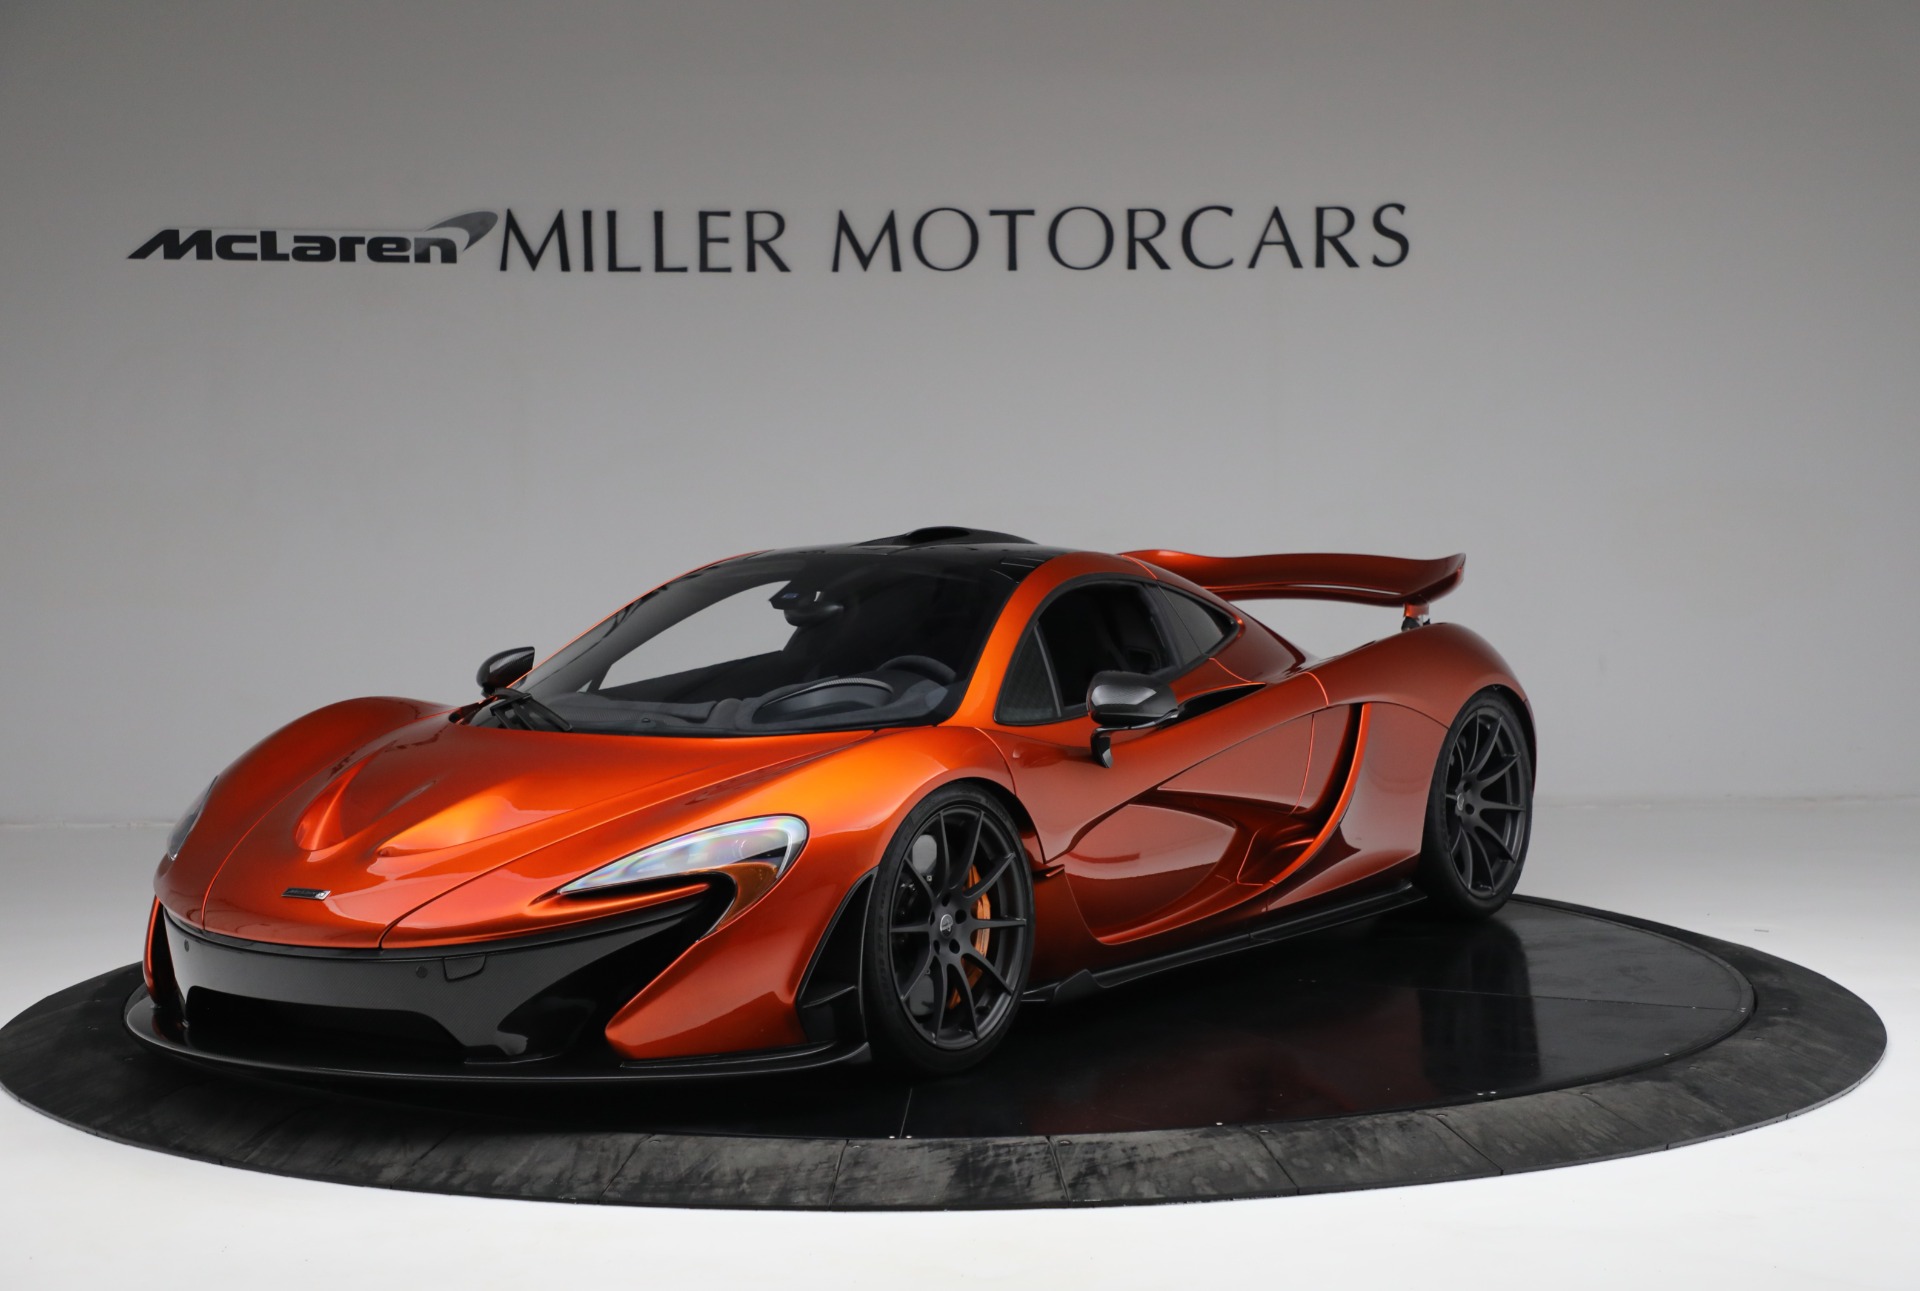 Used 2015 McLaren P1 for sale $2,295,000 at McLaren Greenwich in Greenwich CT 06830 1